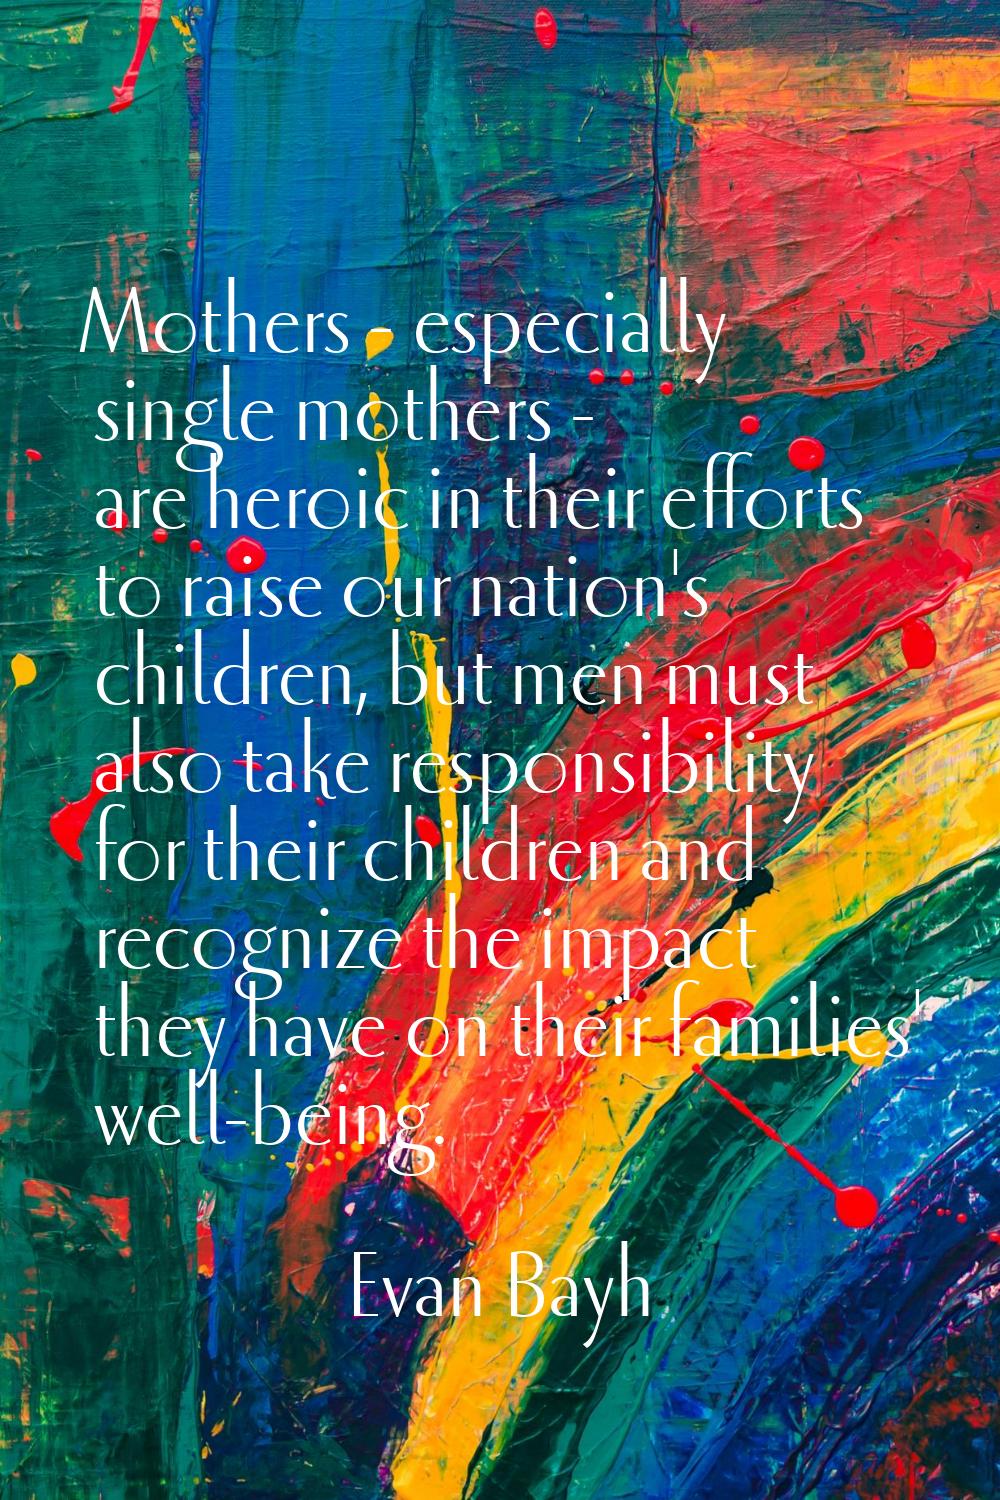 Mothers - especially single mothers - are heroic in their efforts to raise our nation's children, b